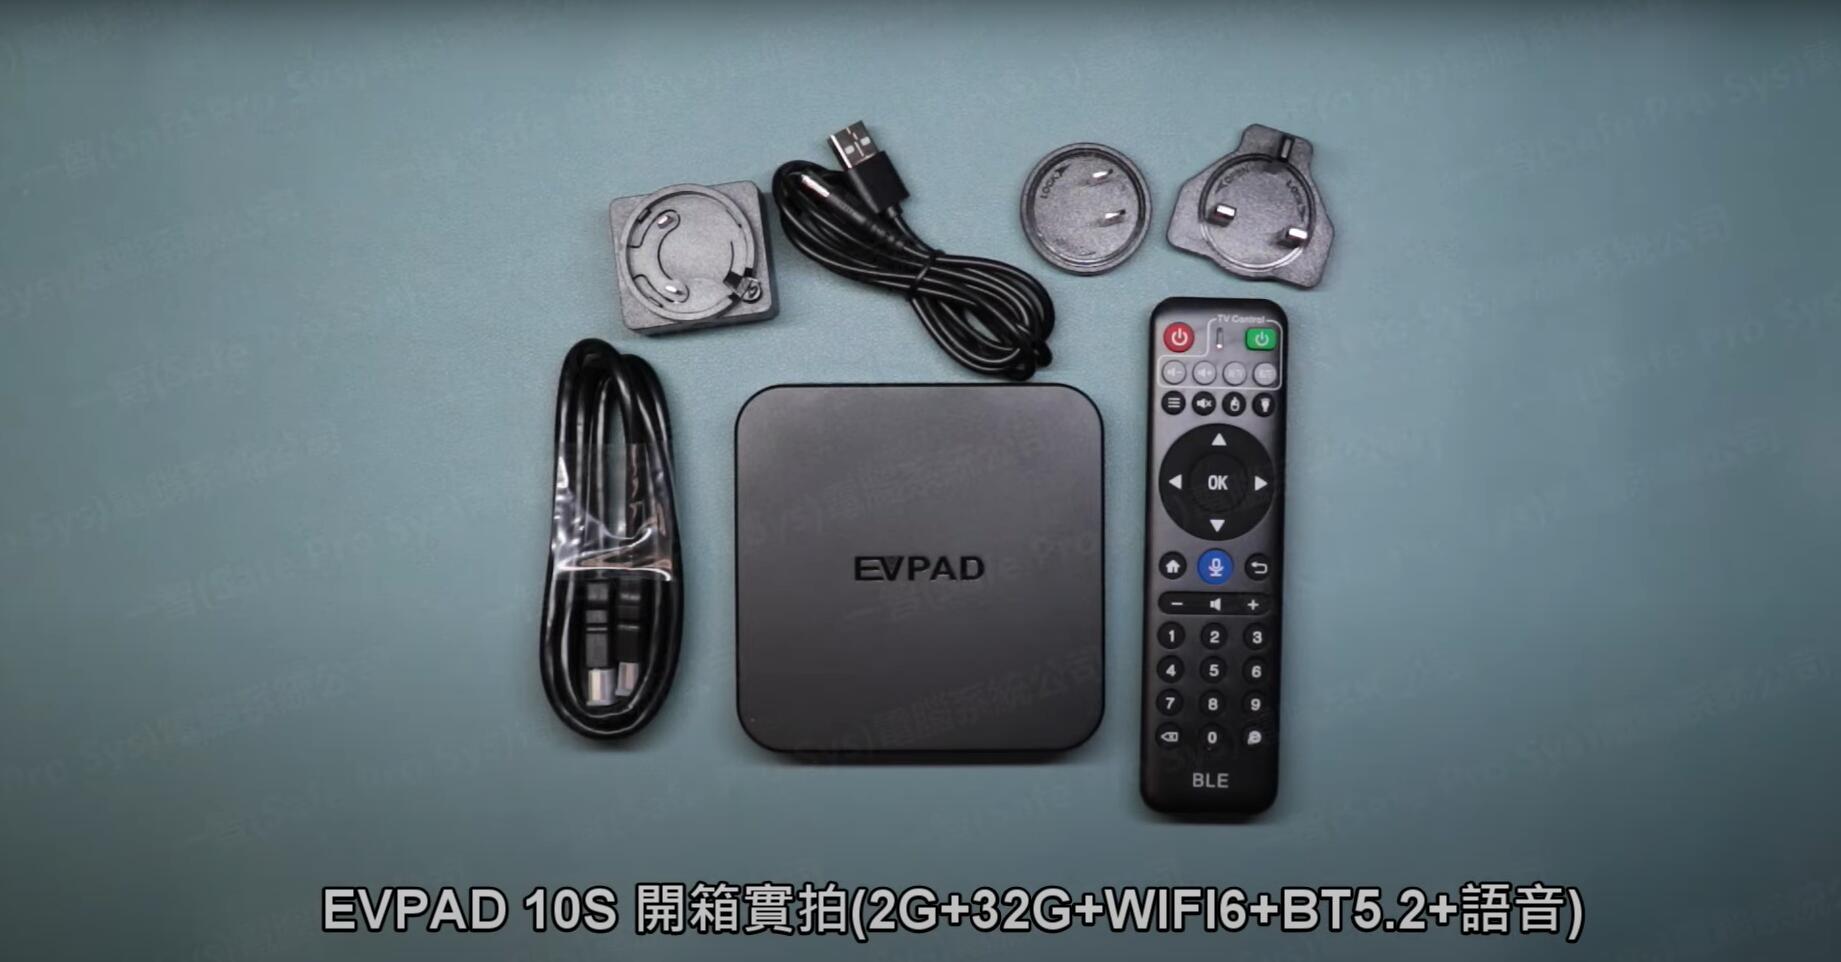 EVPAD 10S TV Box Packing & Real Photo